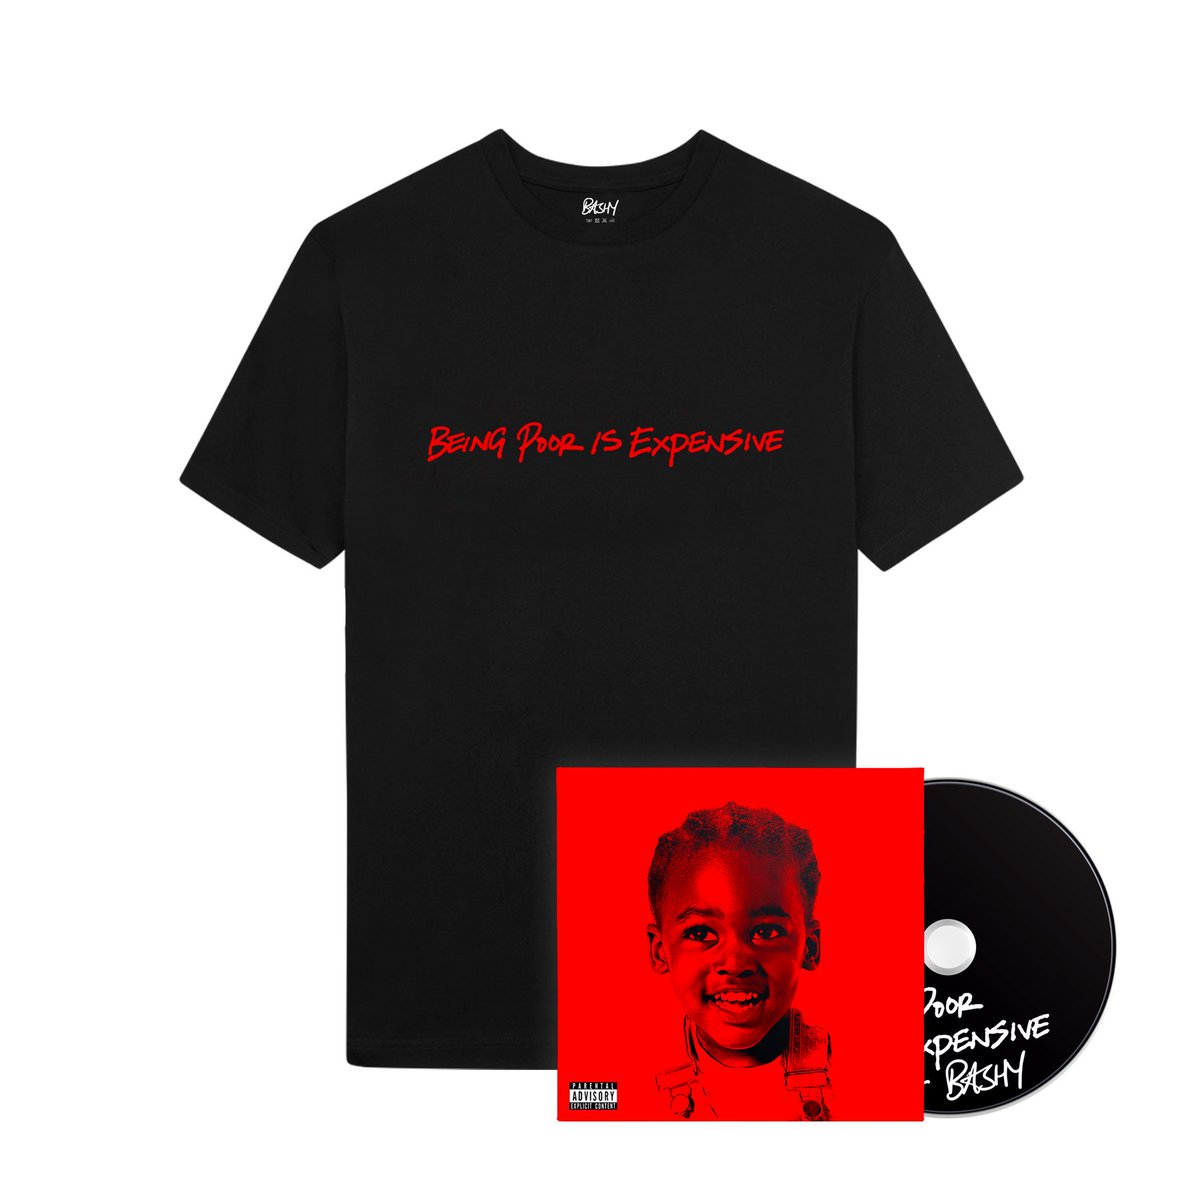 The Online Artist Store is Officially LIVE. BASHY.COM You can grab pieces from the ‘Being Poor is Expensive’ exclusive drop. We’re doing a special limited run. Pre-Order it now while you can.